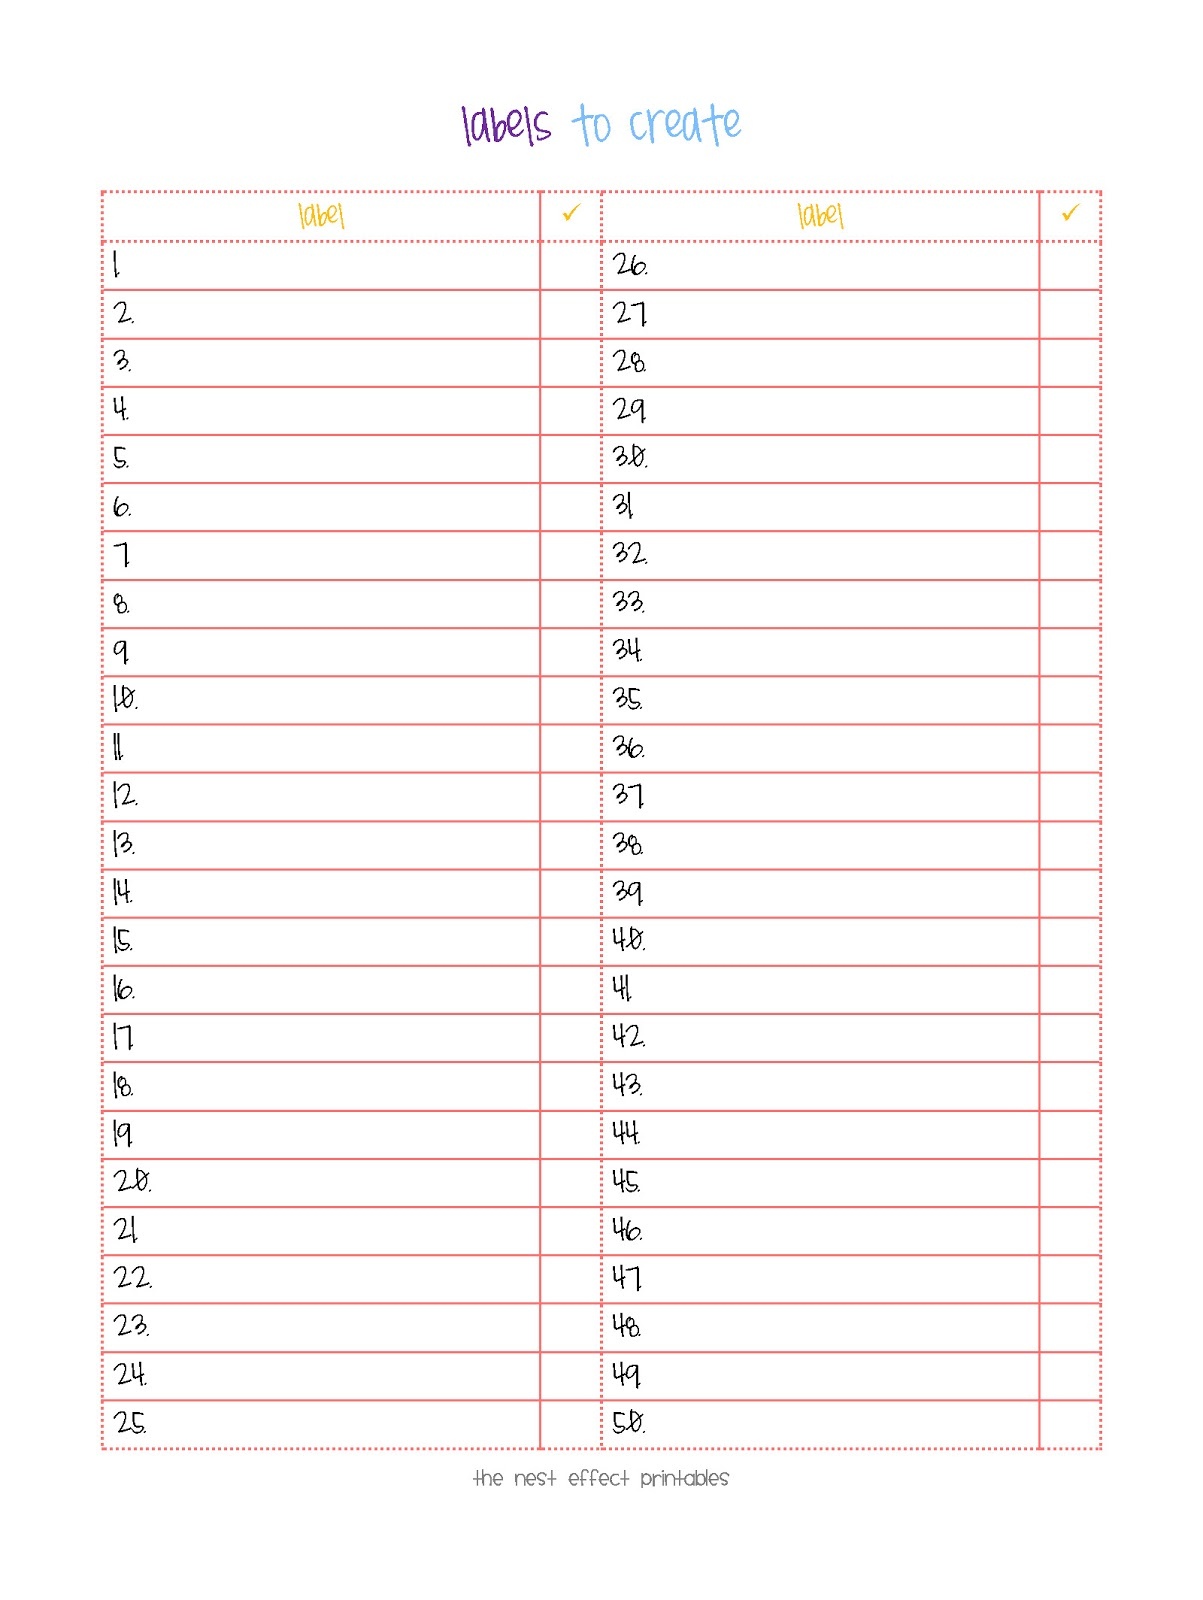 Free Printables: Documents Updated | The Nesting Effect - Free Printable Numbered List